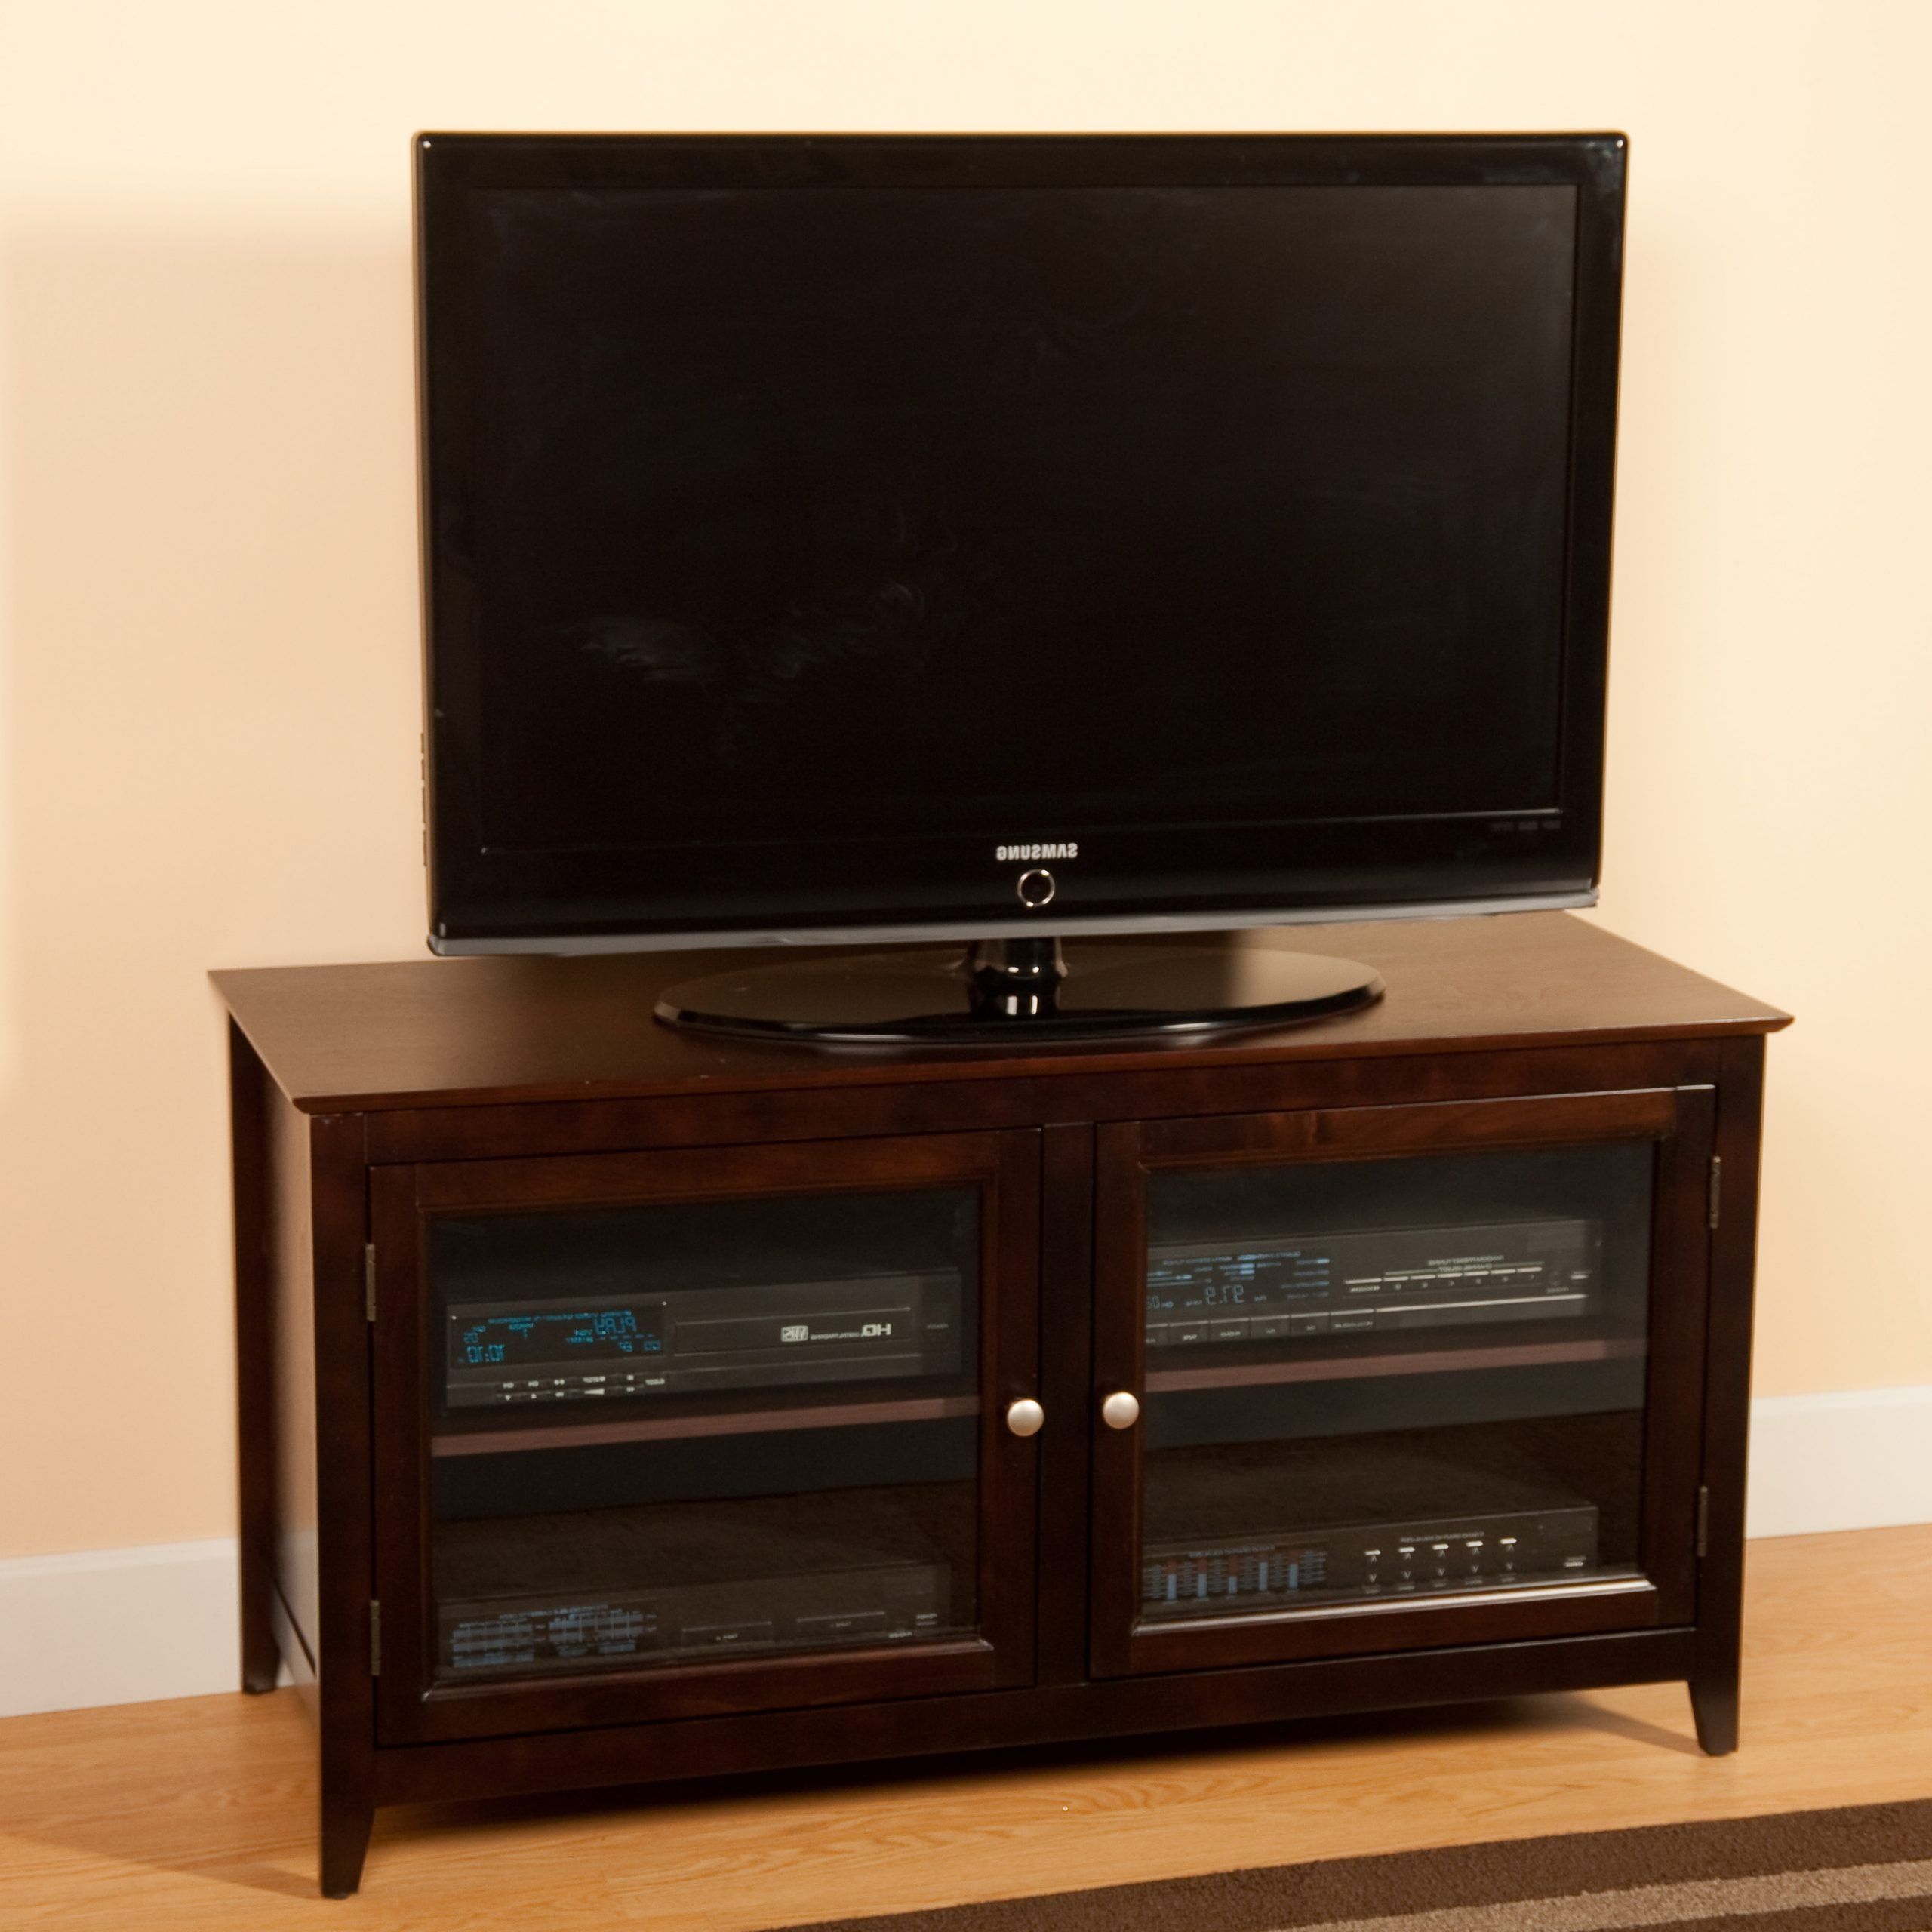 Premier 48 Inch Tv Stand At Hayneedle With Antea Tv Stands For Tvs Up To 48&quot; (Gallery 8 of 20)